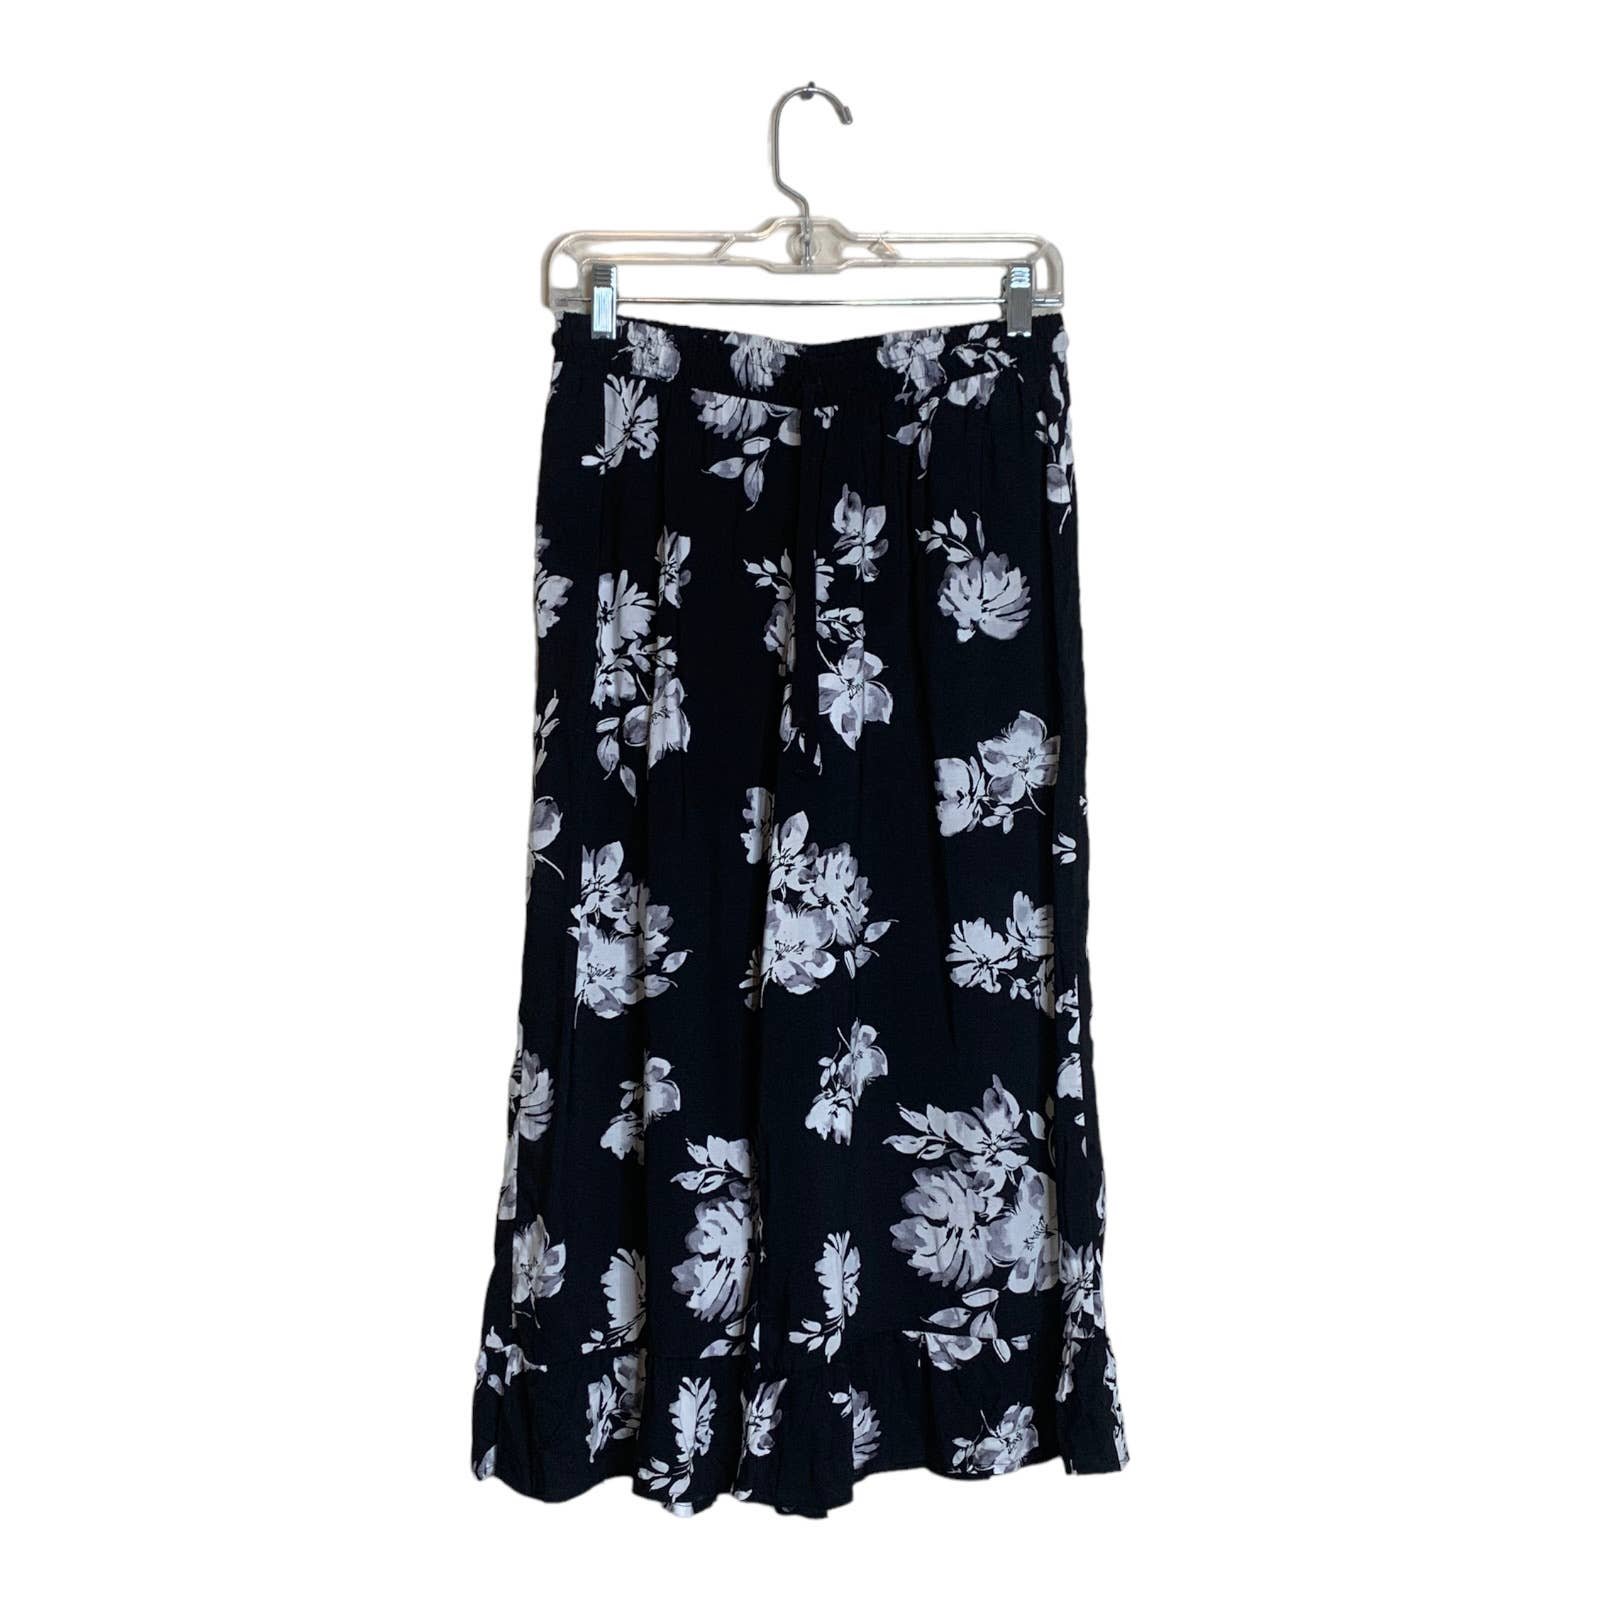 Latest  Vera Wang black sheer floral cropped ruffled hems pull on pants size small IN22dghKb Outlet Store